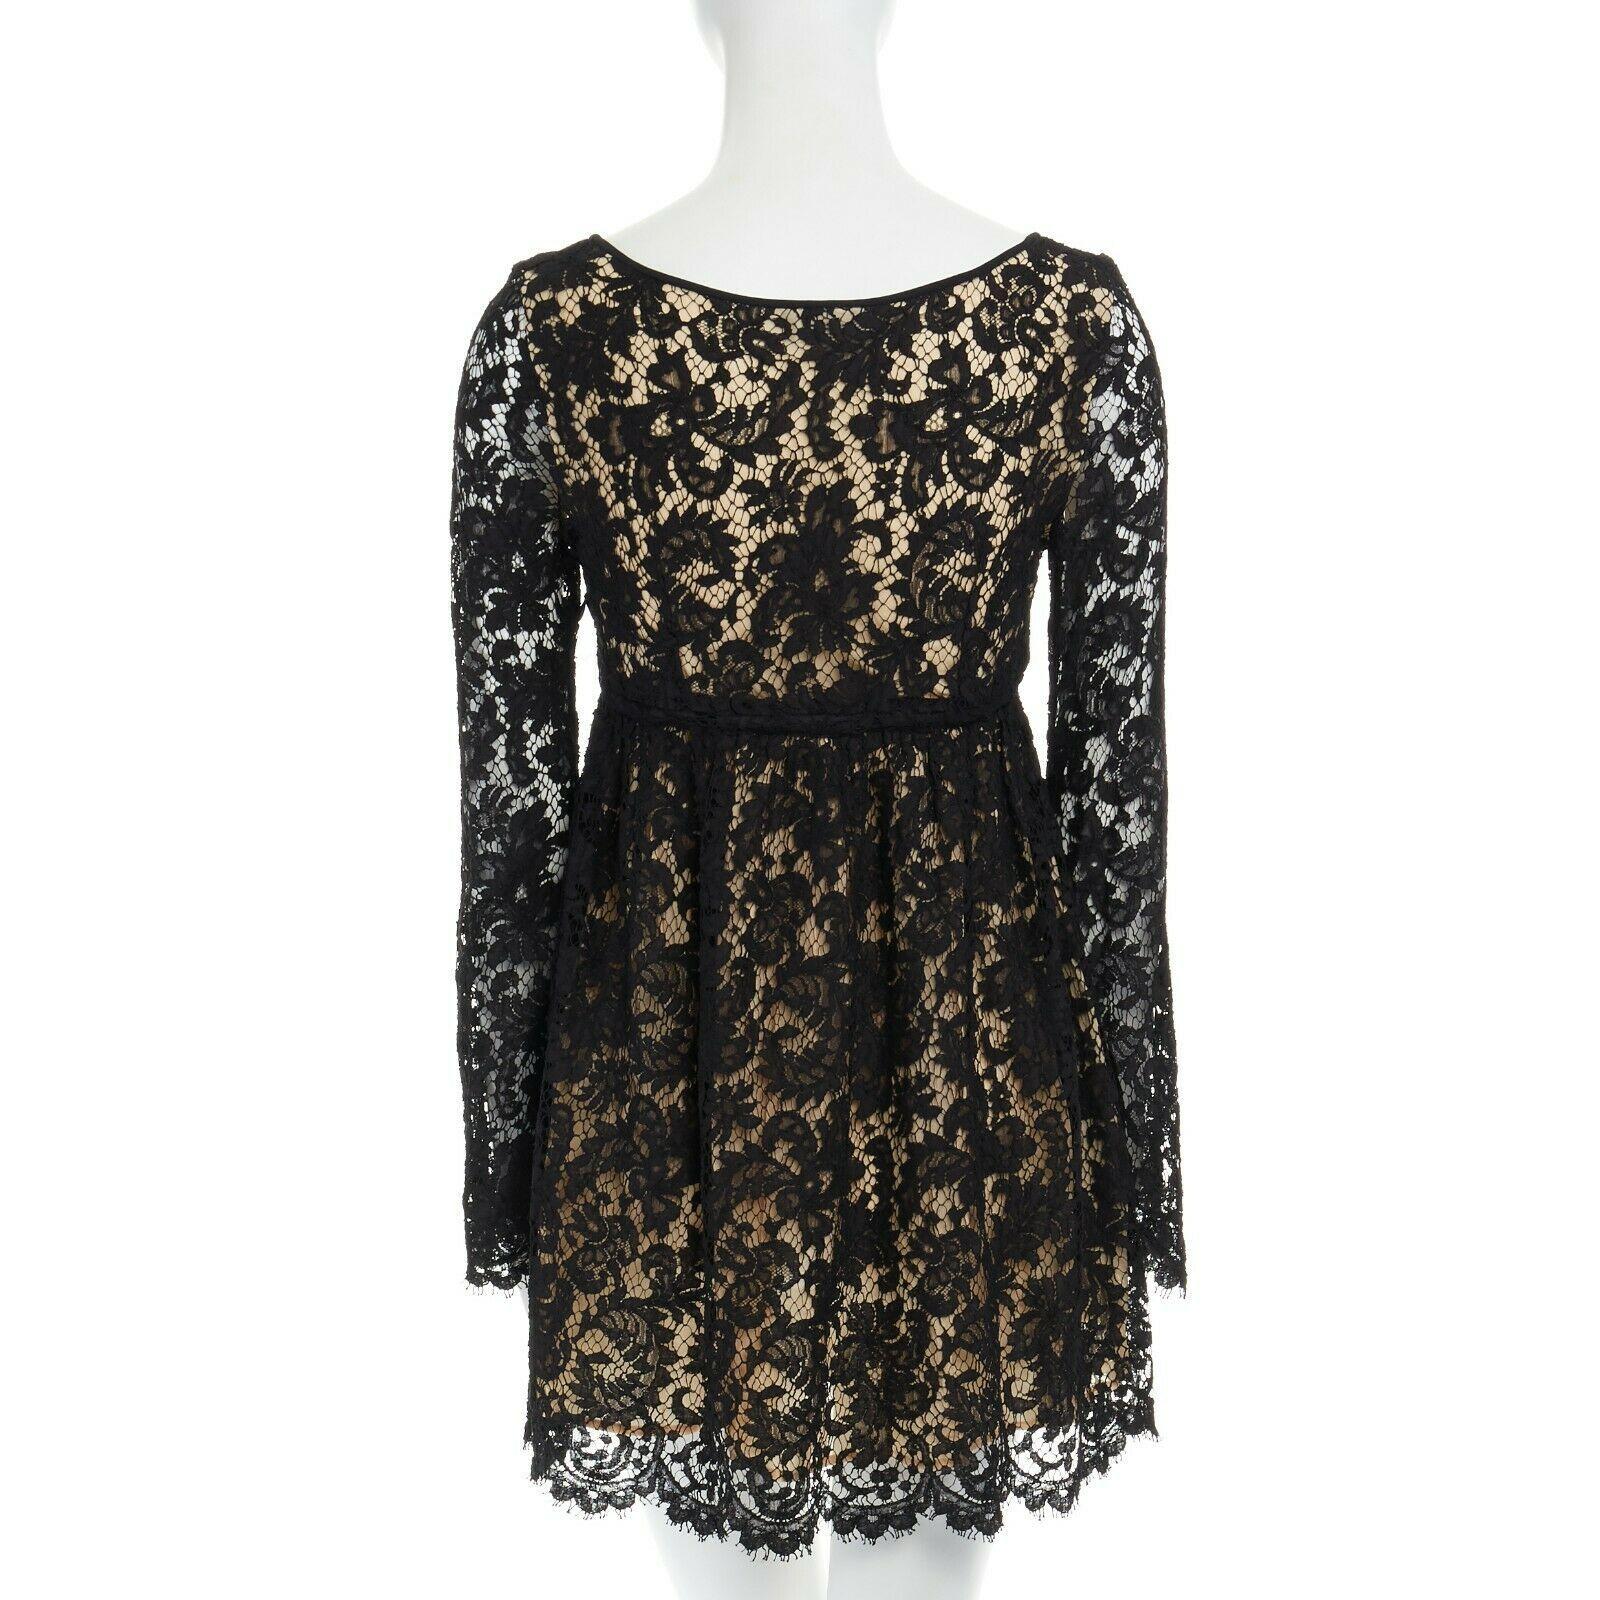 vintage GUCCI TOM FORD SS96 runway black lace scoop flare sleeve mini dress S
GUCCI BY TOM FORD
FROM THE SPRING SUMMER 1996 RUNWAY; 
CAMPAIGN Black floral lace dress. Angular scoop neck. Nude lining at bust. 
Drawstring detail at high waist. Long